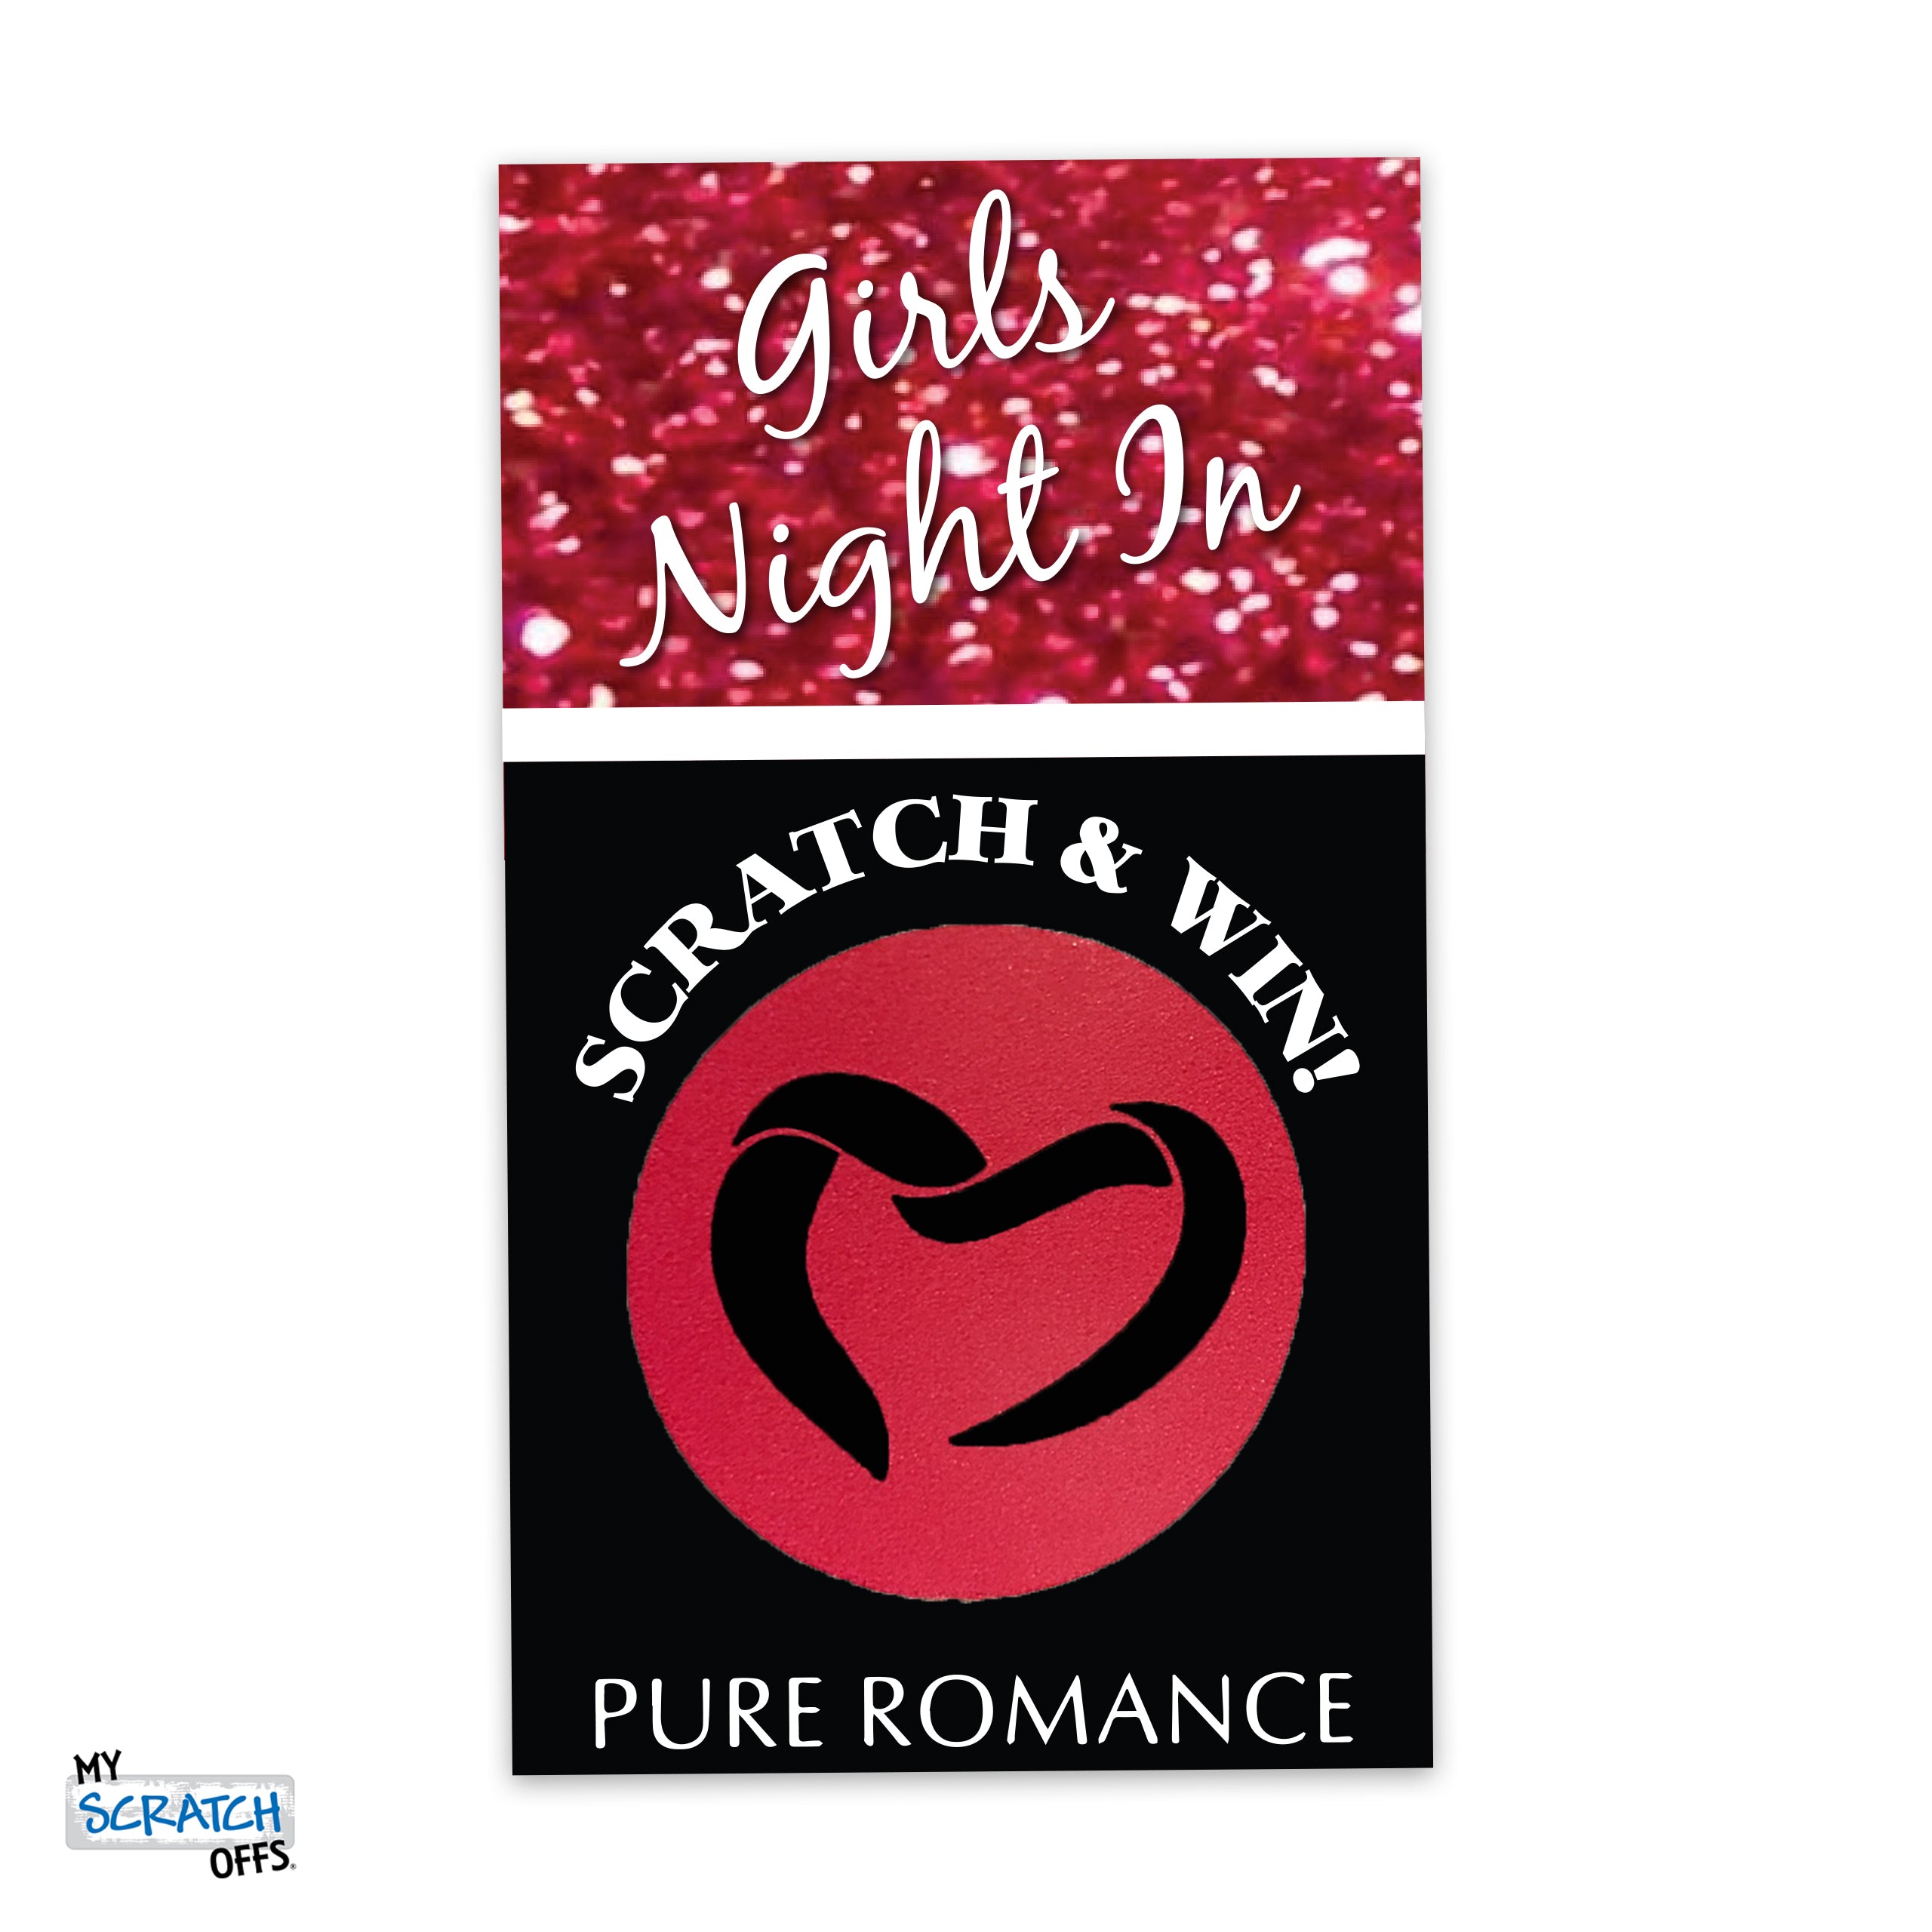 Pure Romance Girls Night In Scratch Off Party Promotion for DIY Self-Print (Digital Download)